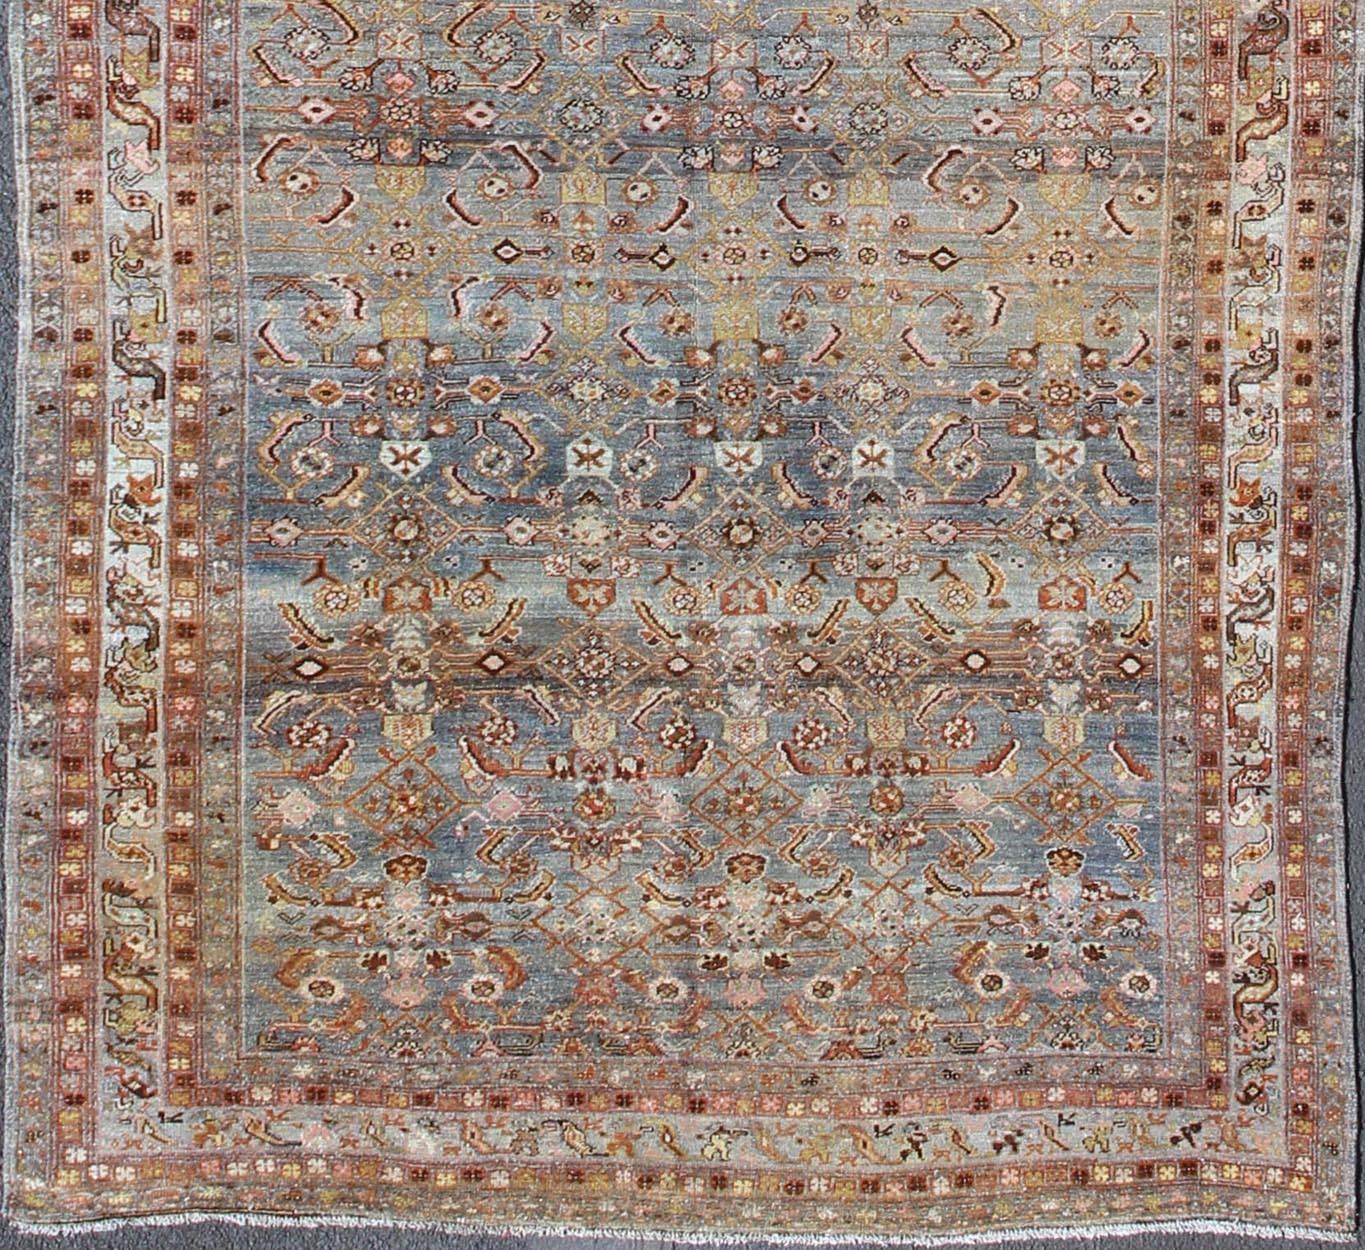 Antique Persian Hamedan with all-over Sub-Geometric Medallion Design, rug 17-1104, country of origin / type: Iran / Hamedan, circa 1910

This antique Persian Hamedan gallery rug (circa early 20th century) features a unique blend of colors and an